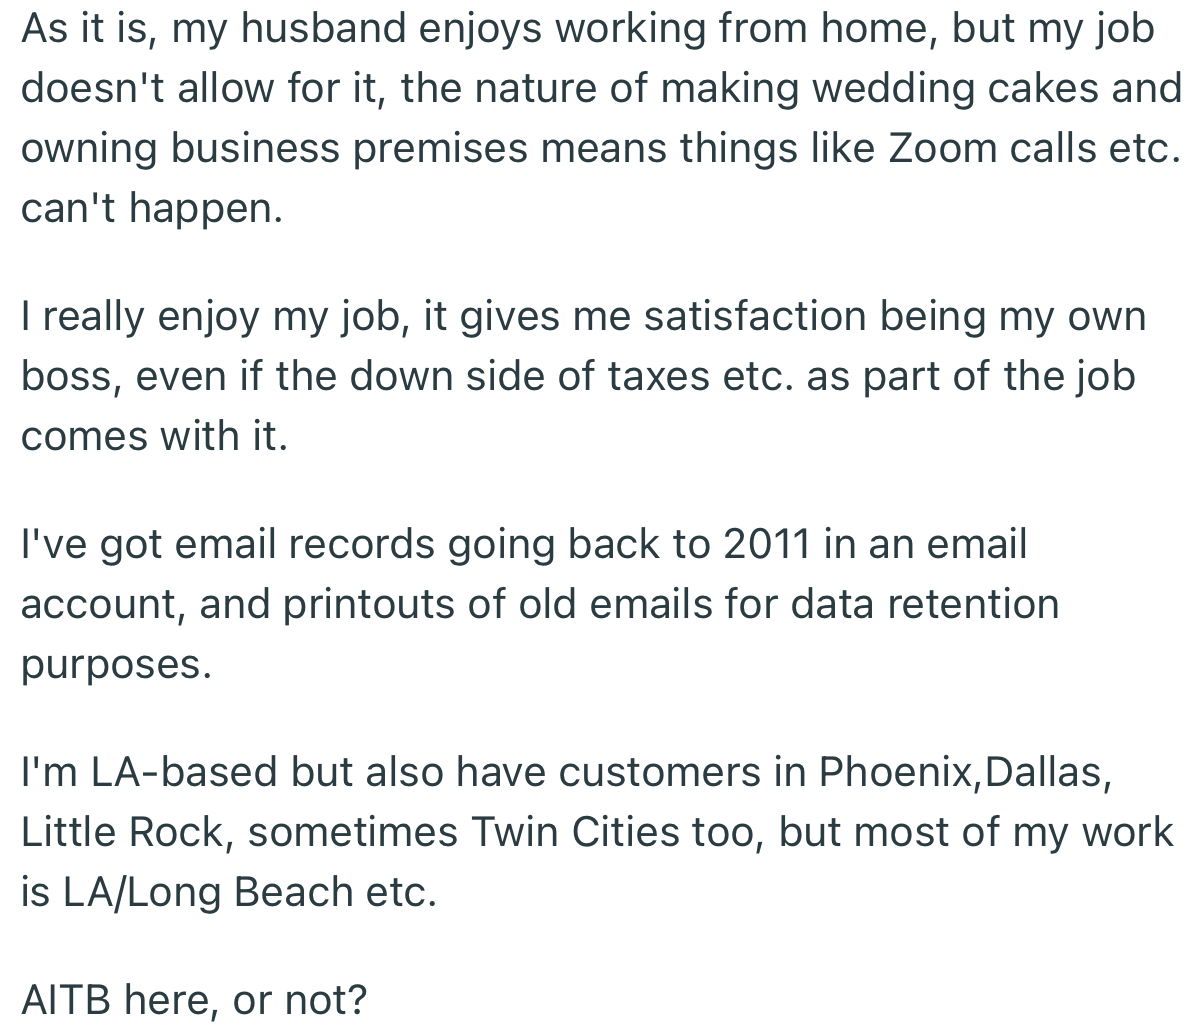 While OP’s husband can easily work remotely, her business doesn’t give her the freedom to do that